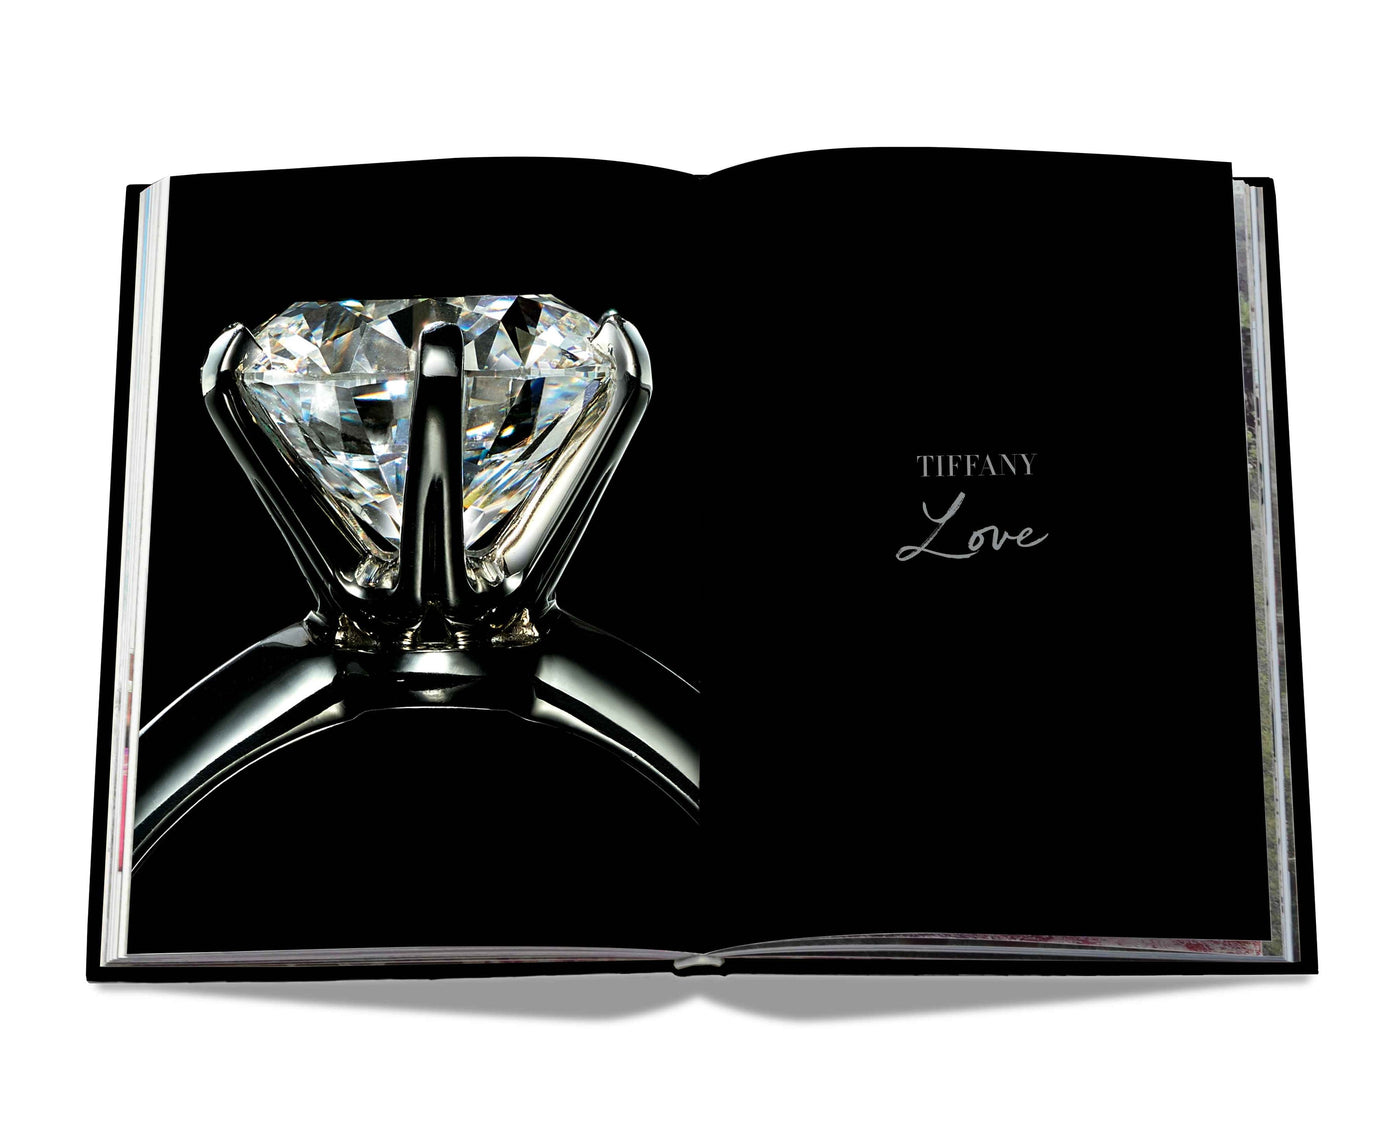 Tiffany & Co. Vision And Virtuosity (Icon Edition)